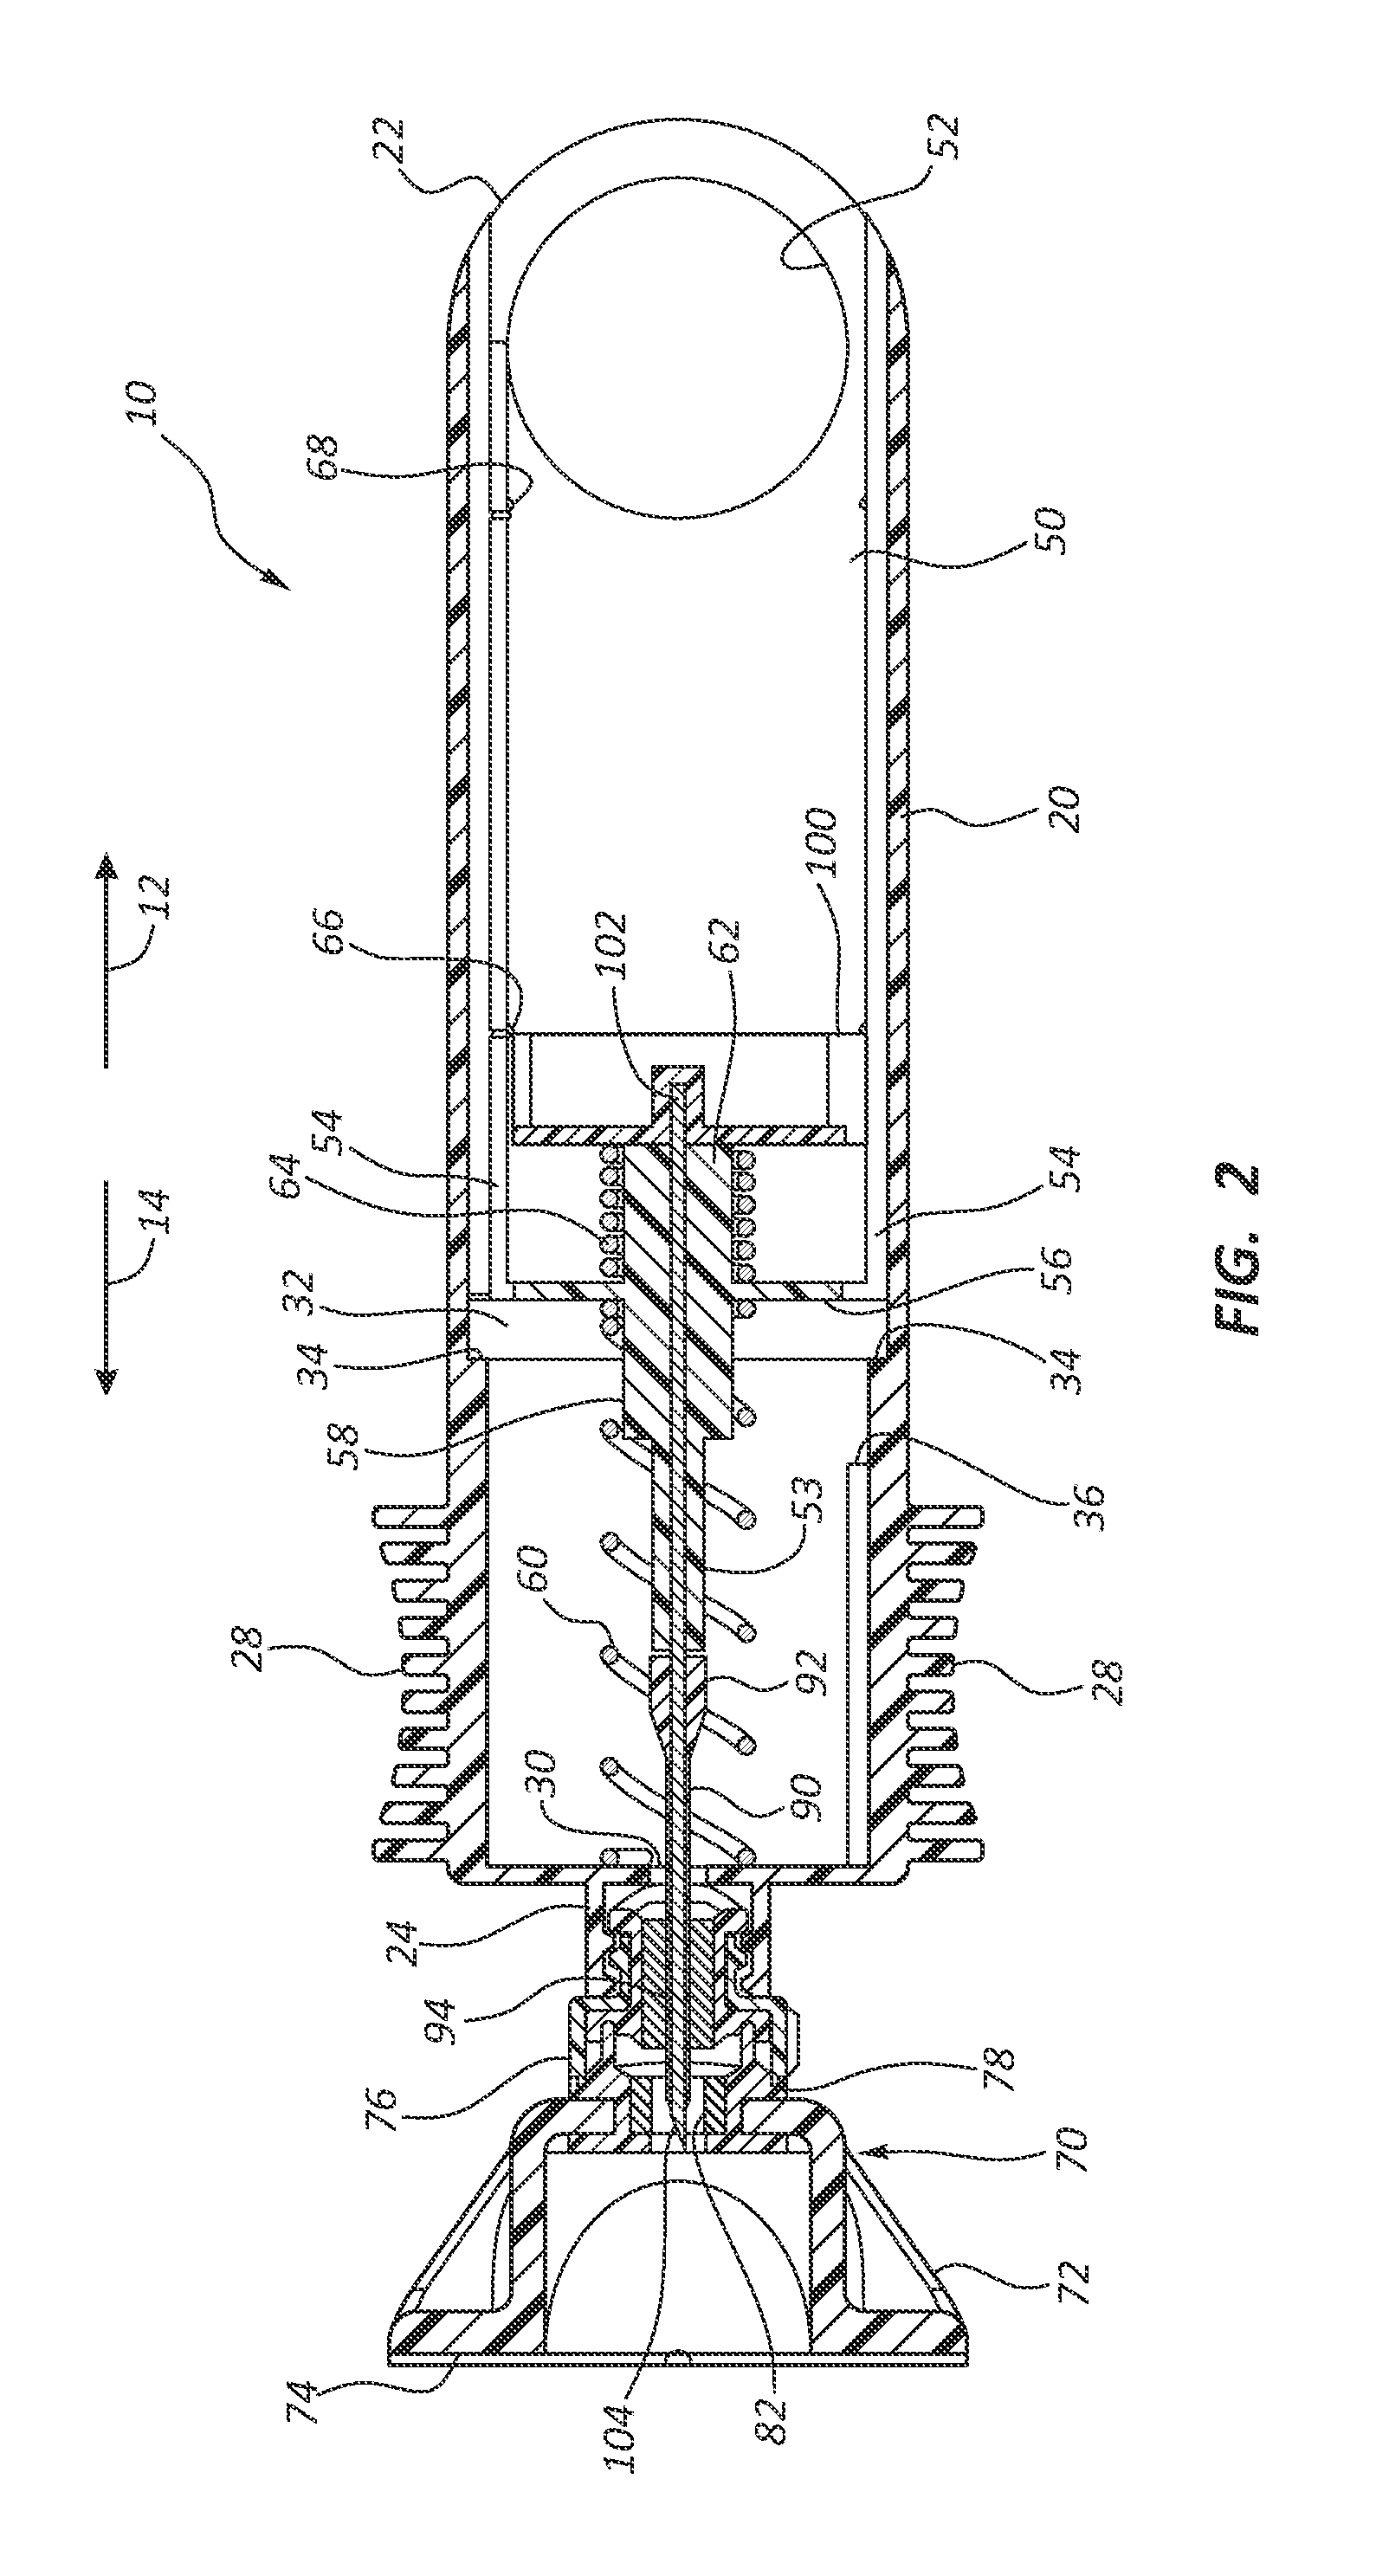 Integrated catheter securement and luer access device